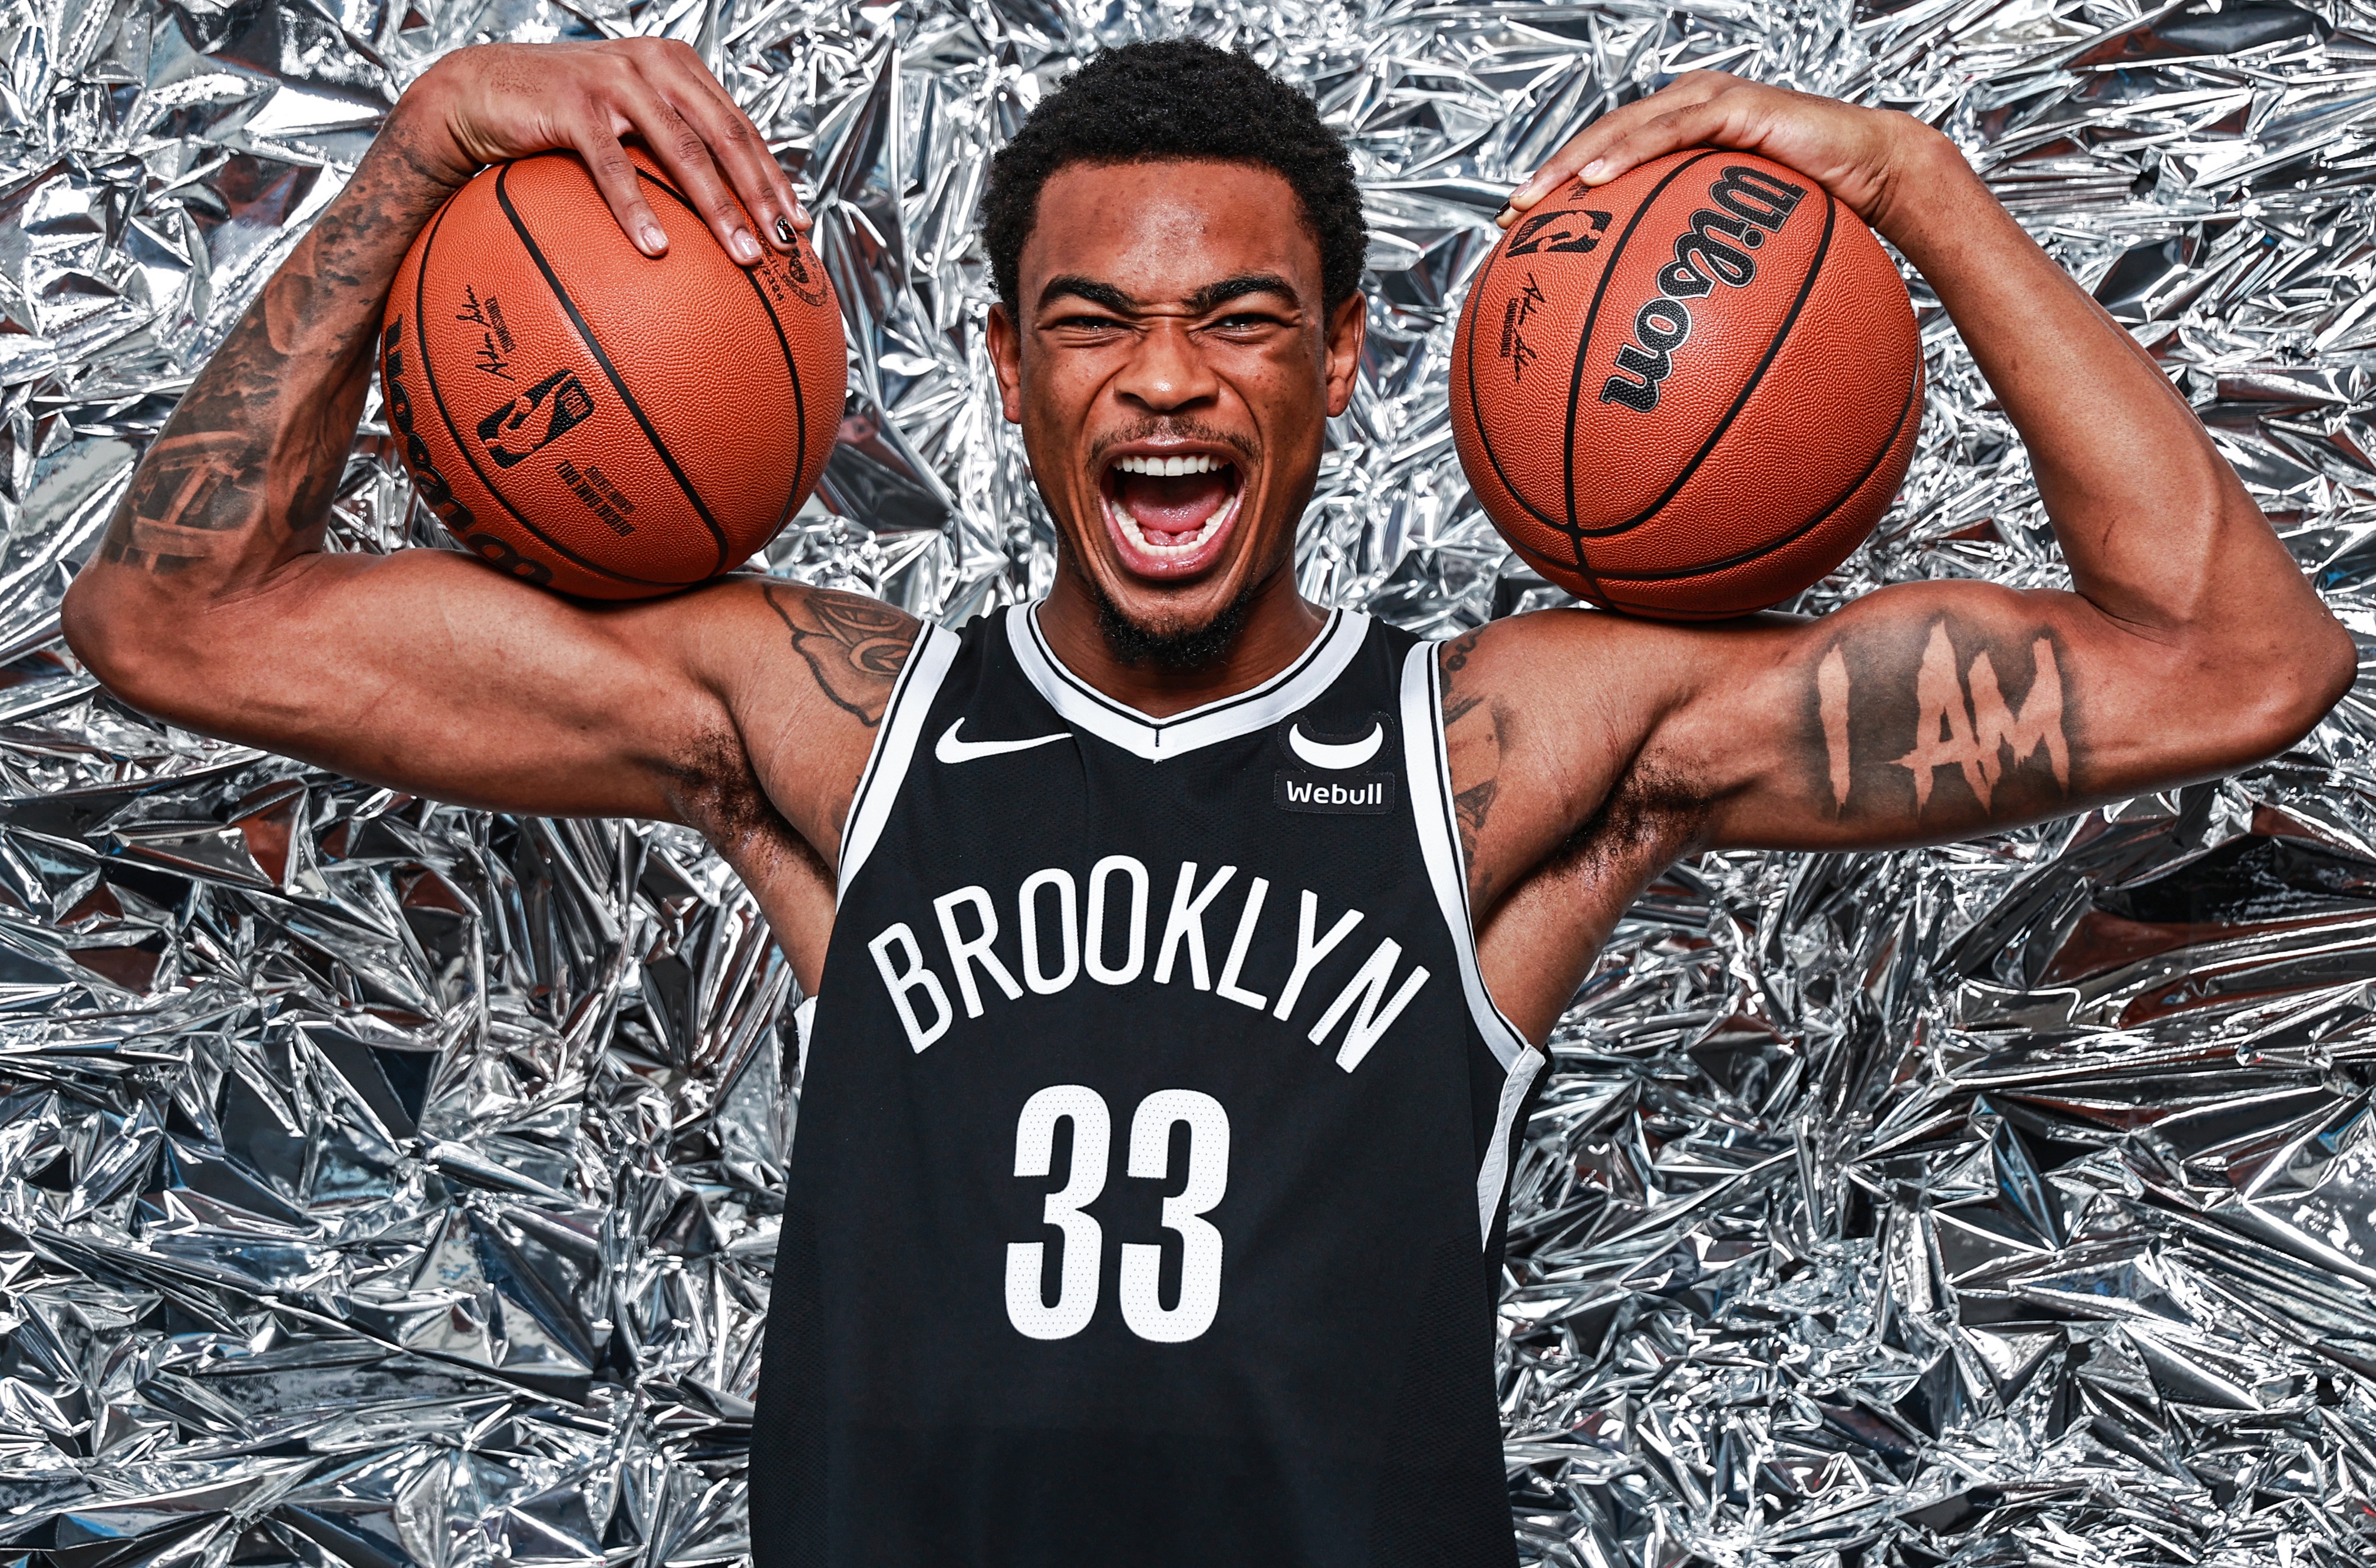 NBA Buzz - Brooklyn Nets have brought back their 1970s, Julius